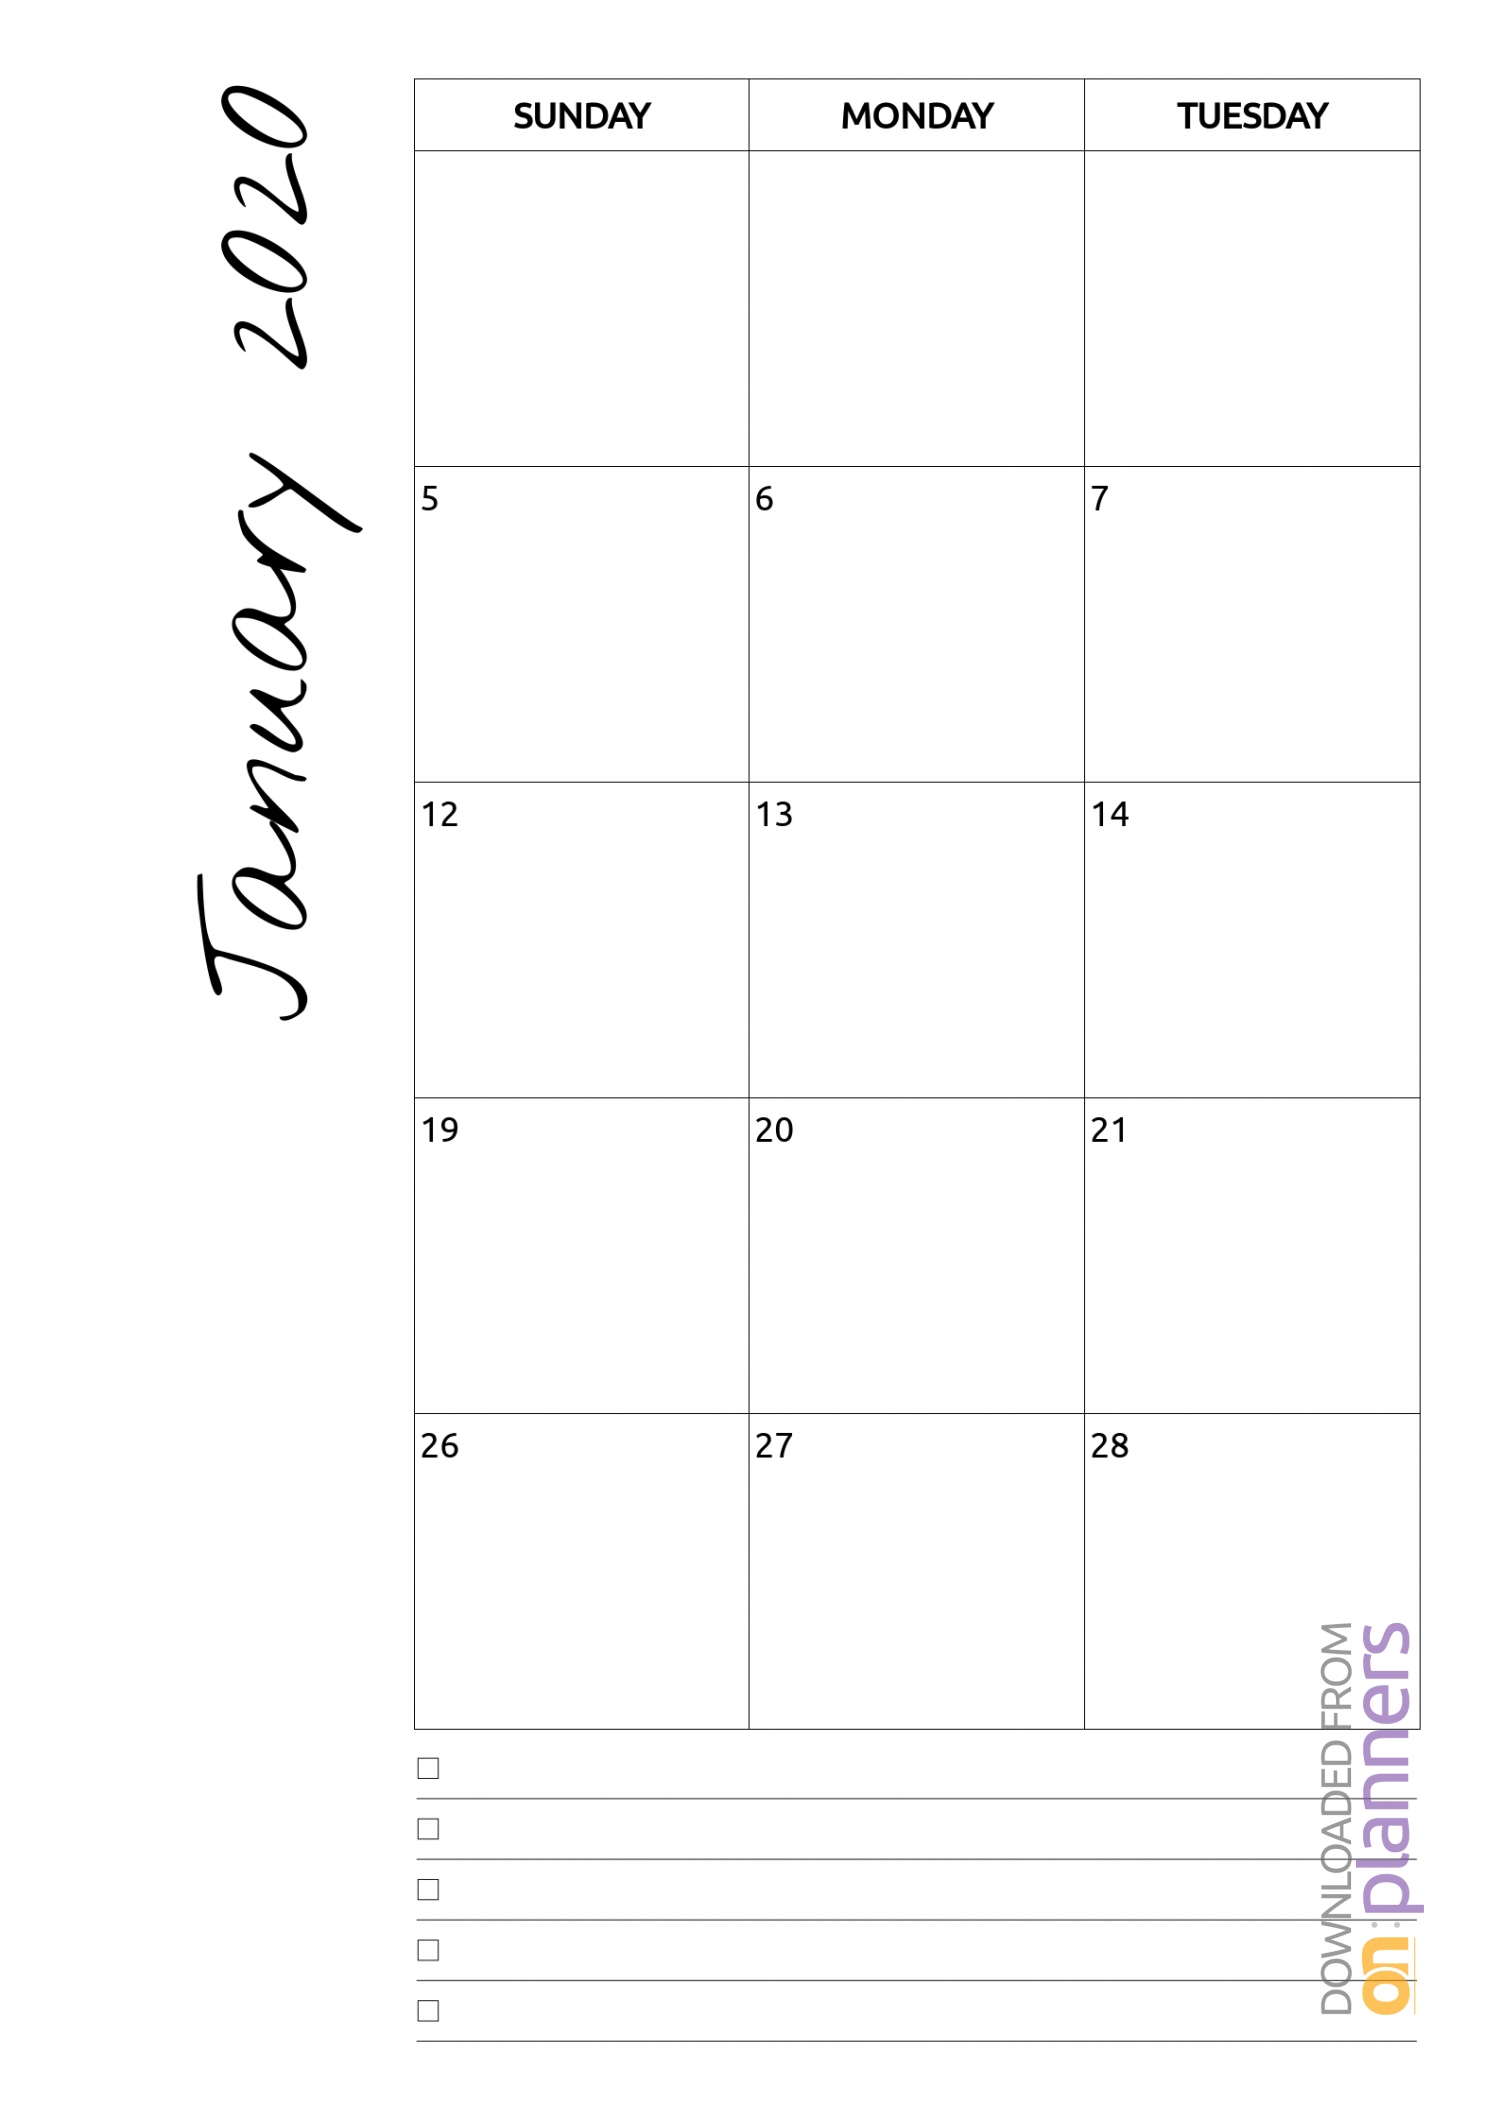 Download Printable Monthly Calendar With Notes Pdf-Monthly Calendars 2020 Printable Free 2-Pages Blank